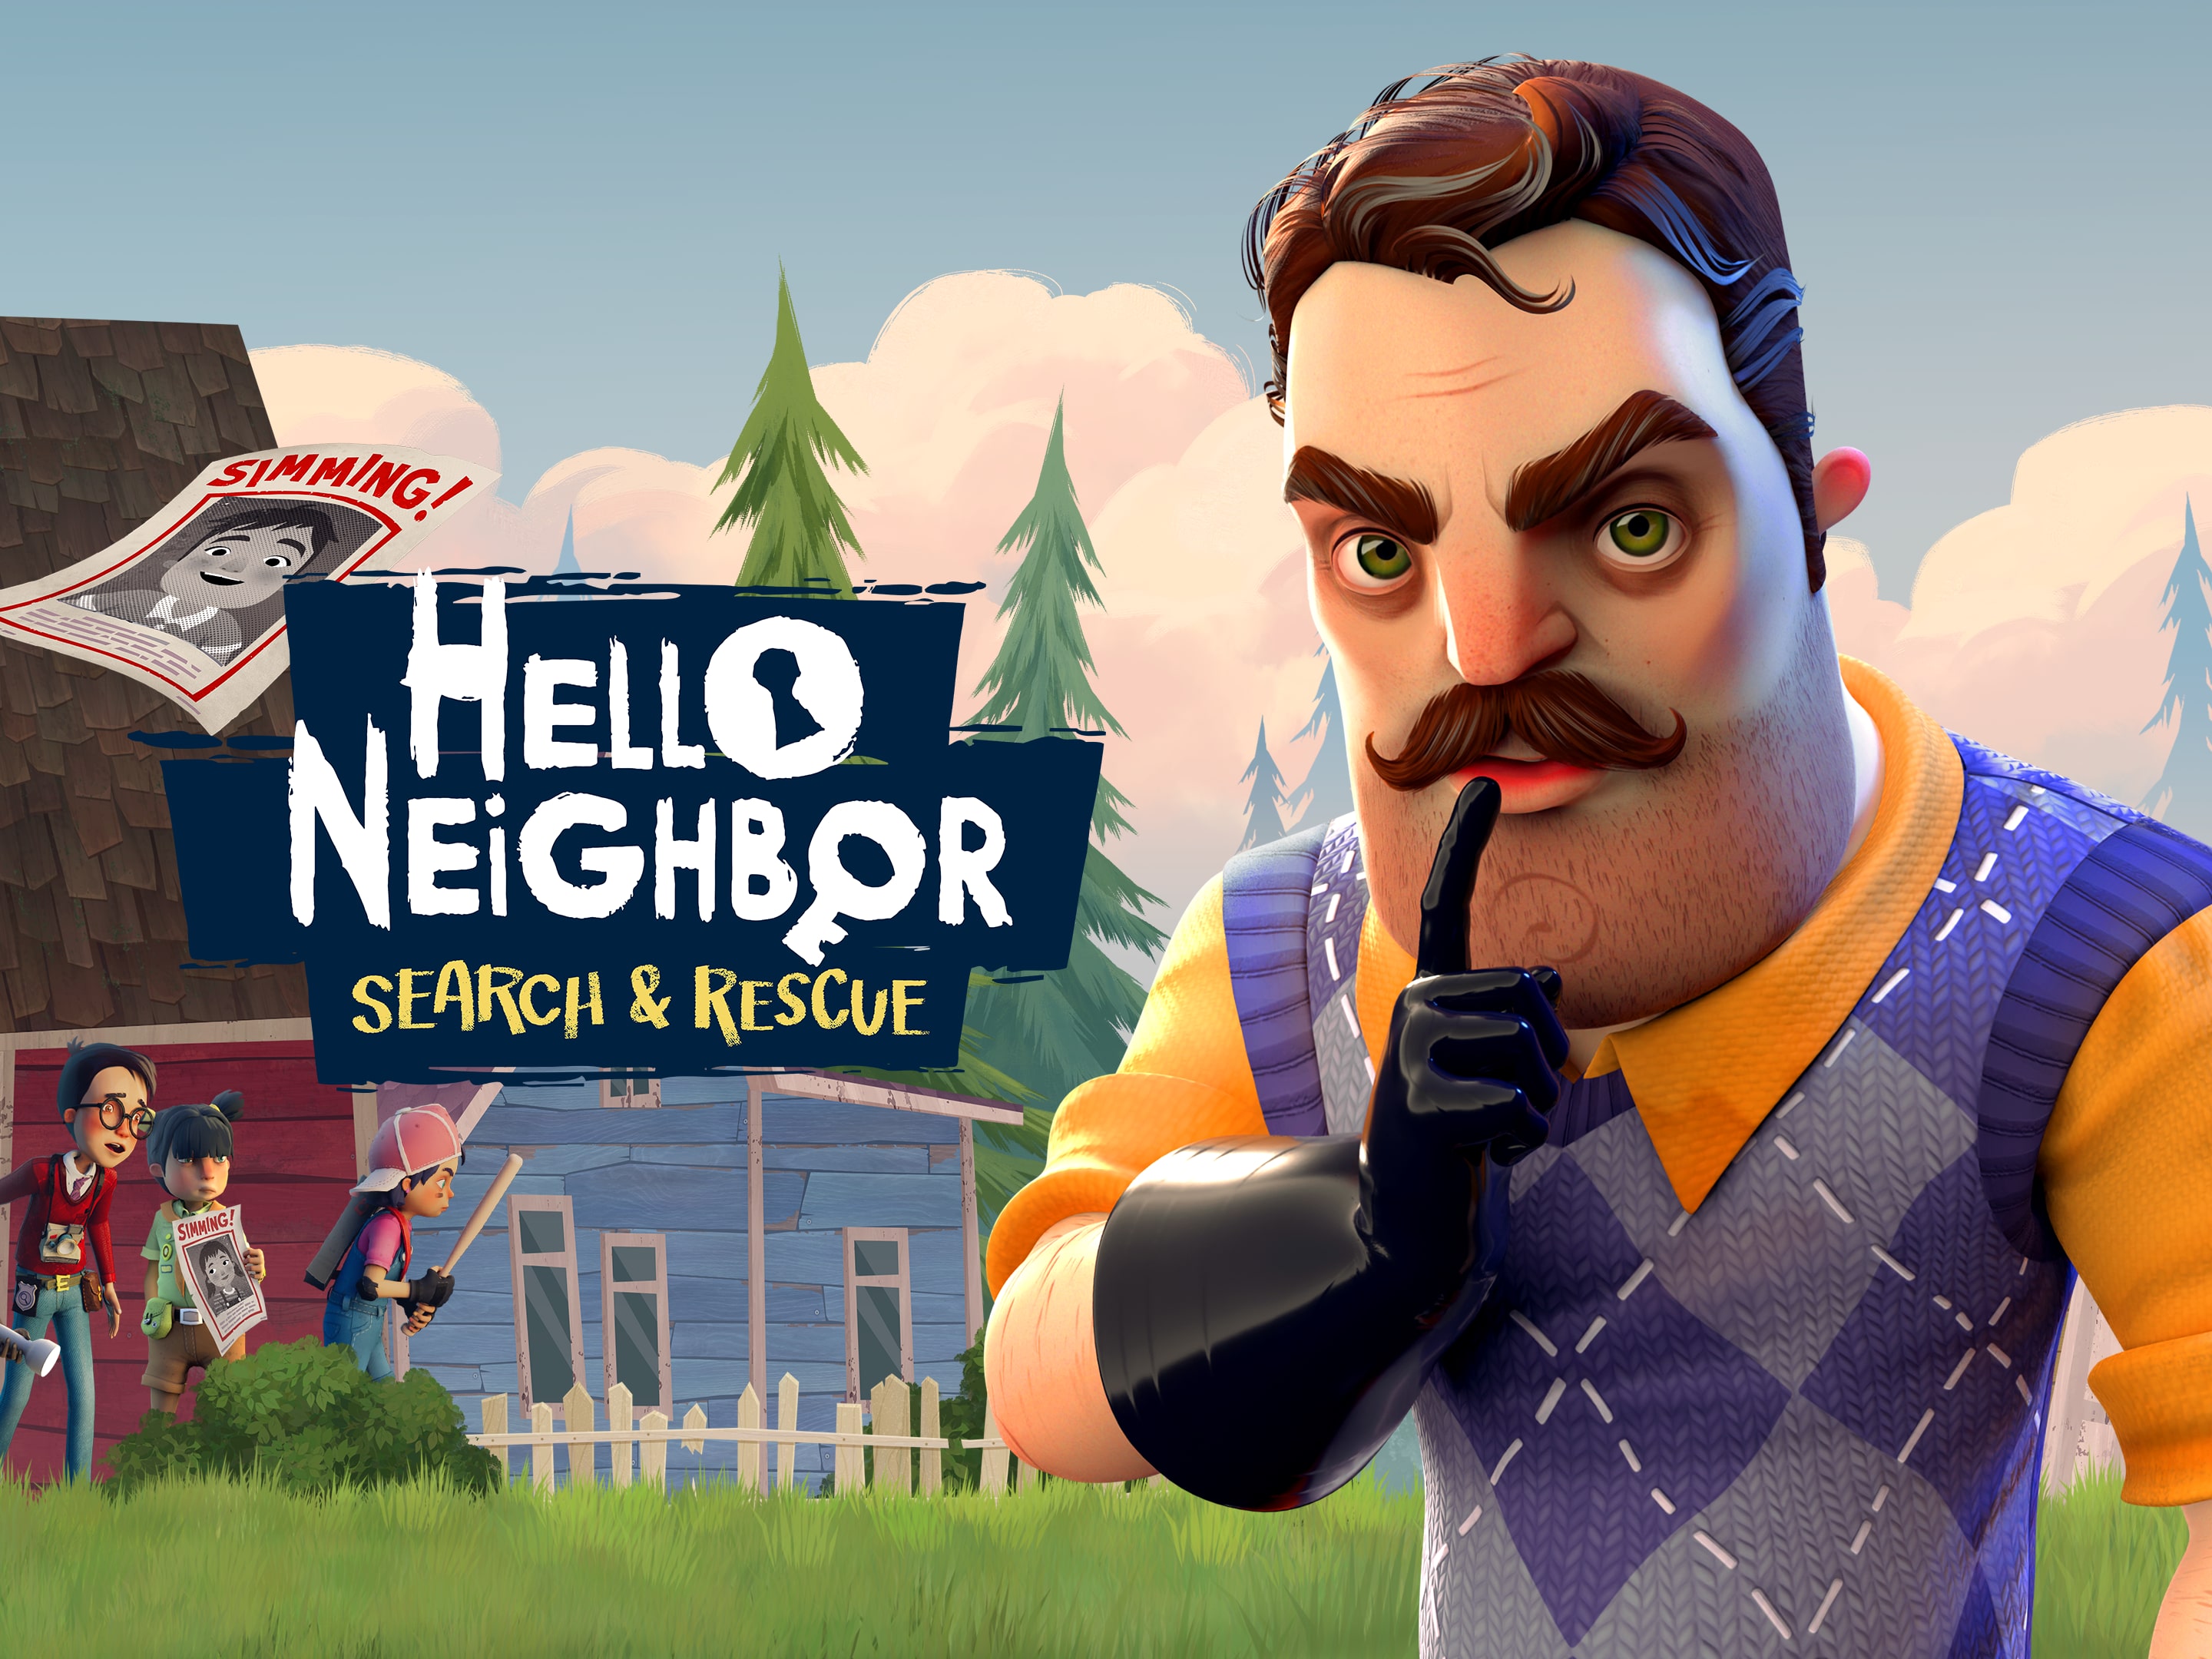 Neighbor: Hello Search Rescue and